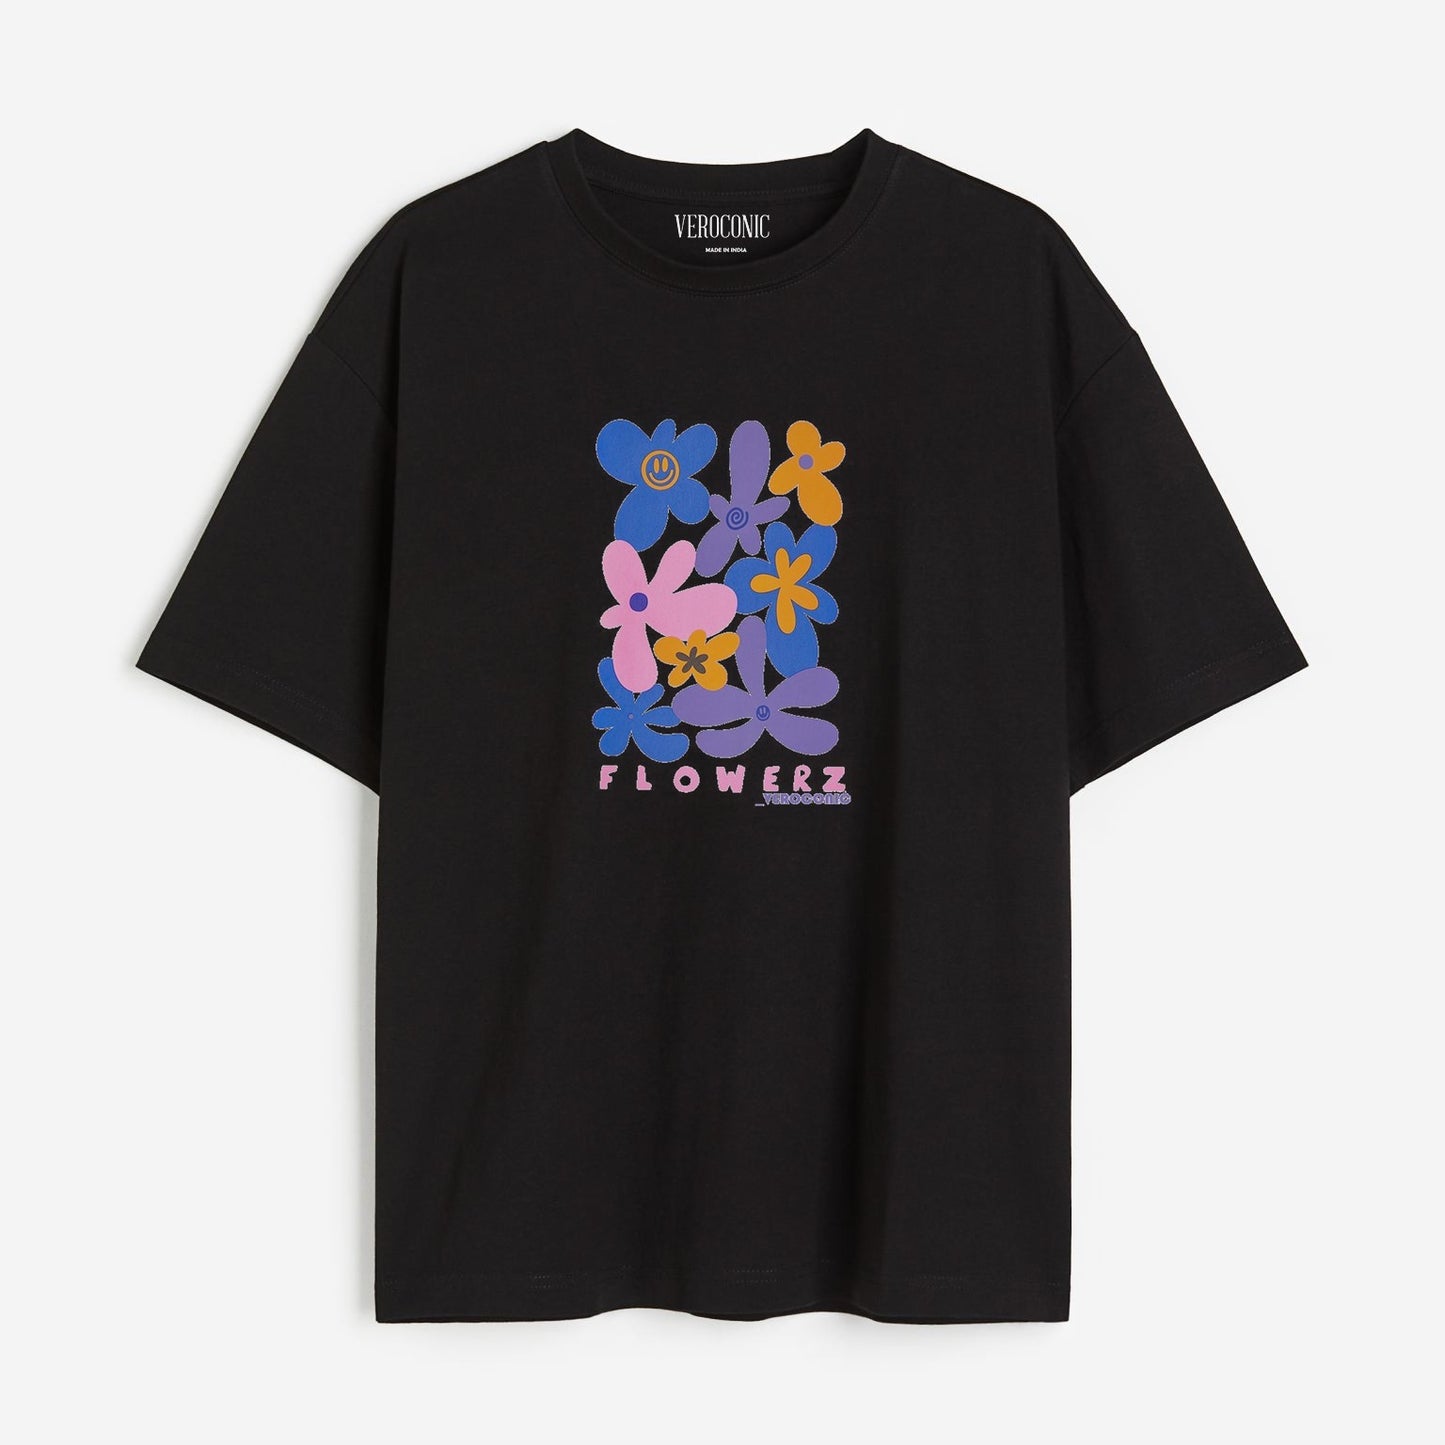 Flower Graphic Printed Oversized Black Cotton T-shirt